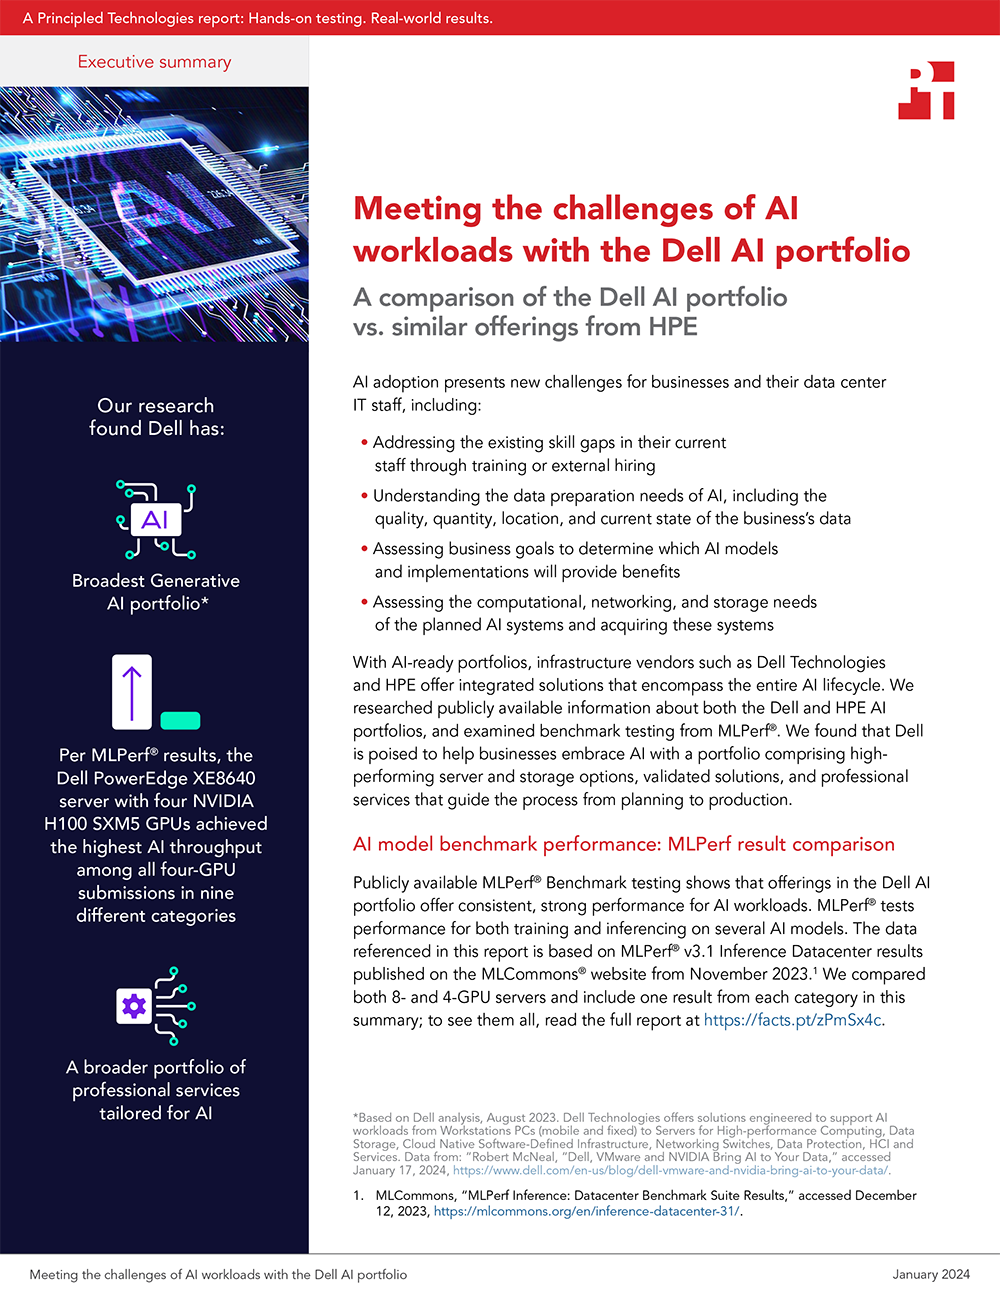 Meeting the challenges of AI workloads with the Dell AI portfolio – Summary